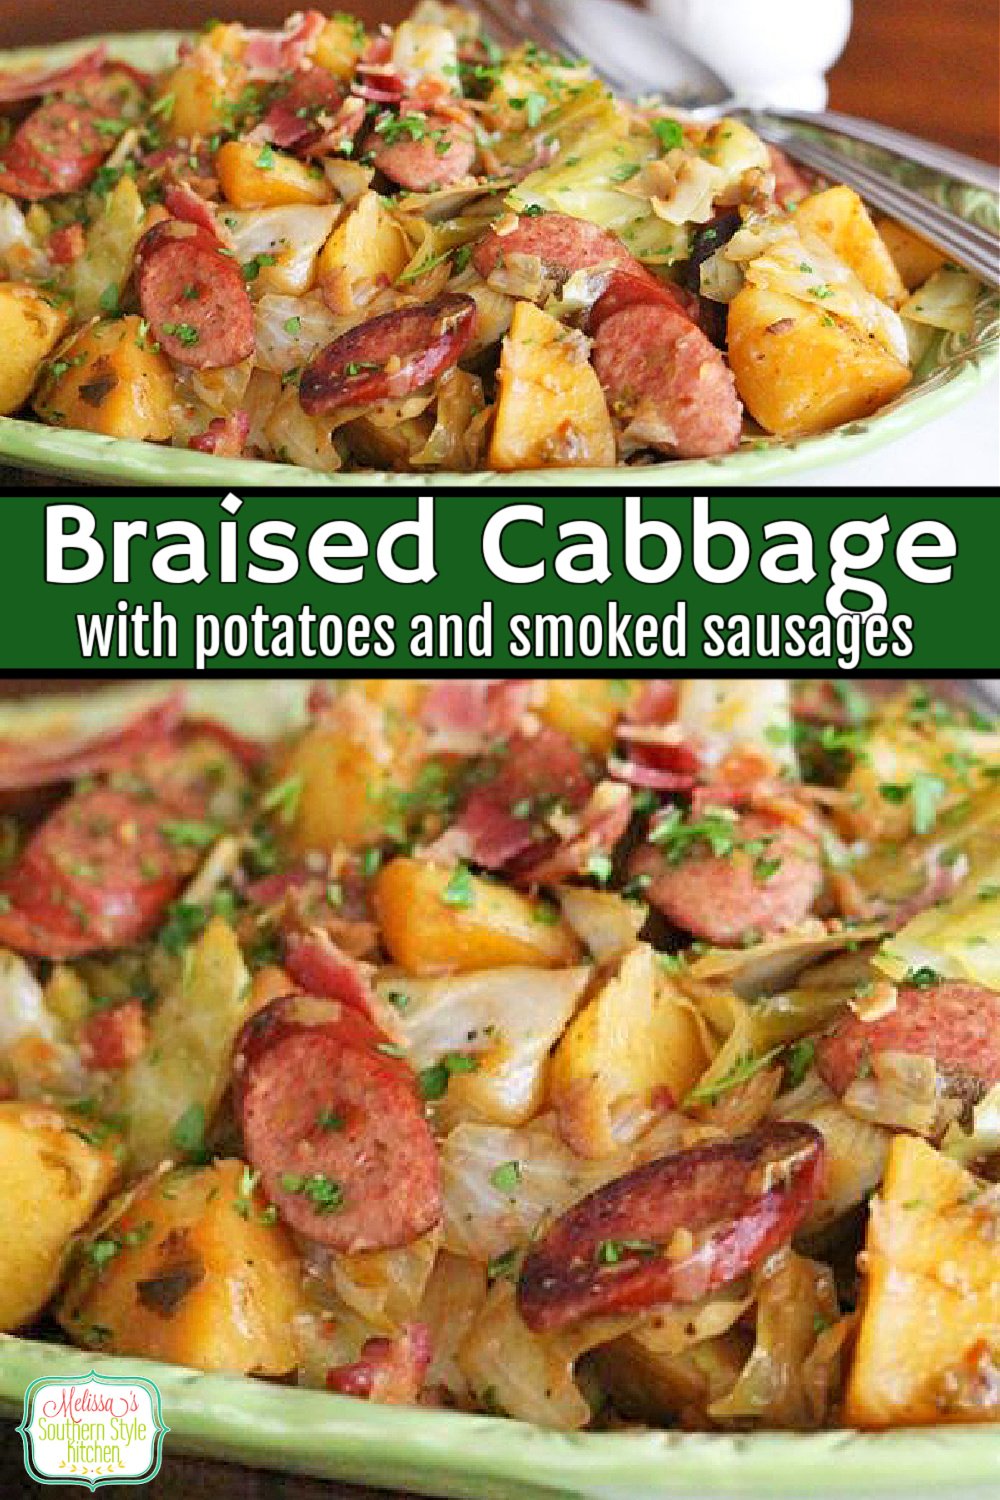 This simple braised cabbage dish is packed with flavor and won't break the bank #braisedcabbage #cabbage #friedcabbage #potatoes #smokedsausages #kielbasa #cabbagepotatoessmokedsausages #dinner #dinnerideas #southernfood #southernrecipes via @melissasssk